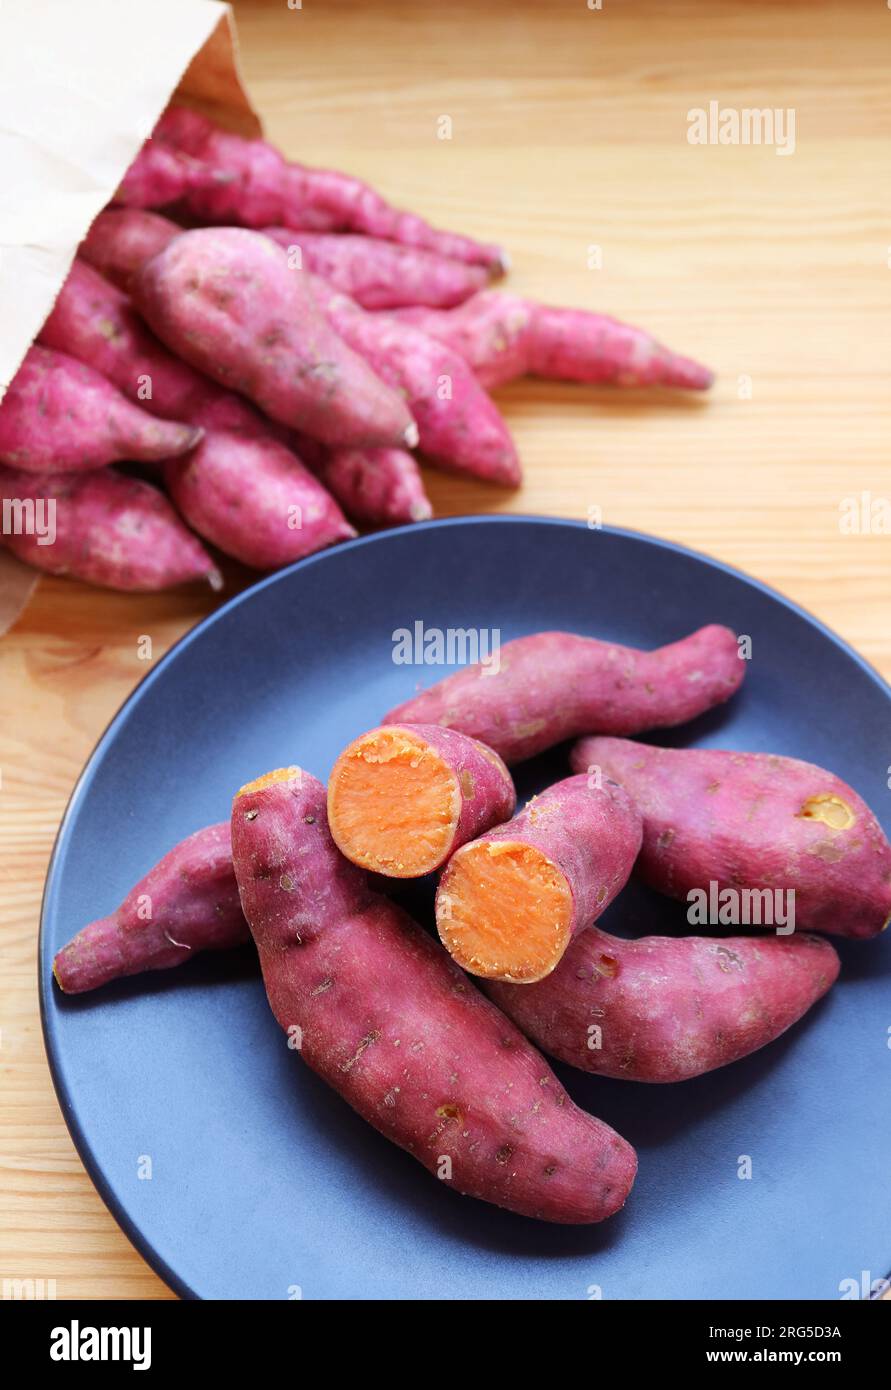 Plate of Boiled Sweet Potatoes, a Source of Tasty Good Carbs Stock Photo